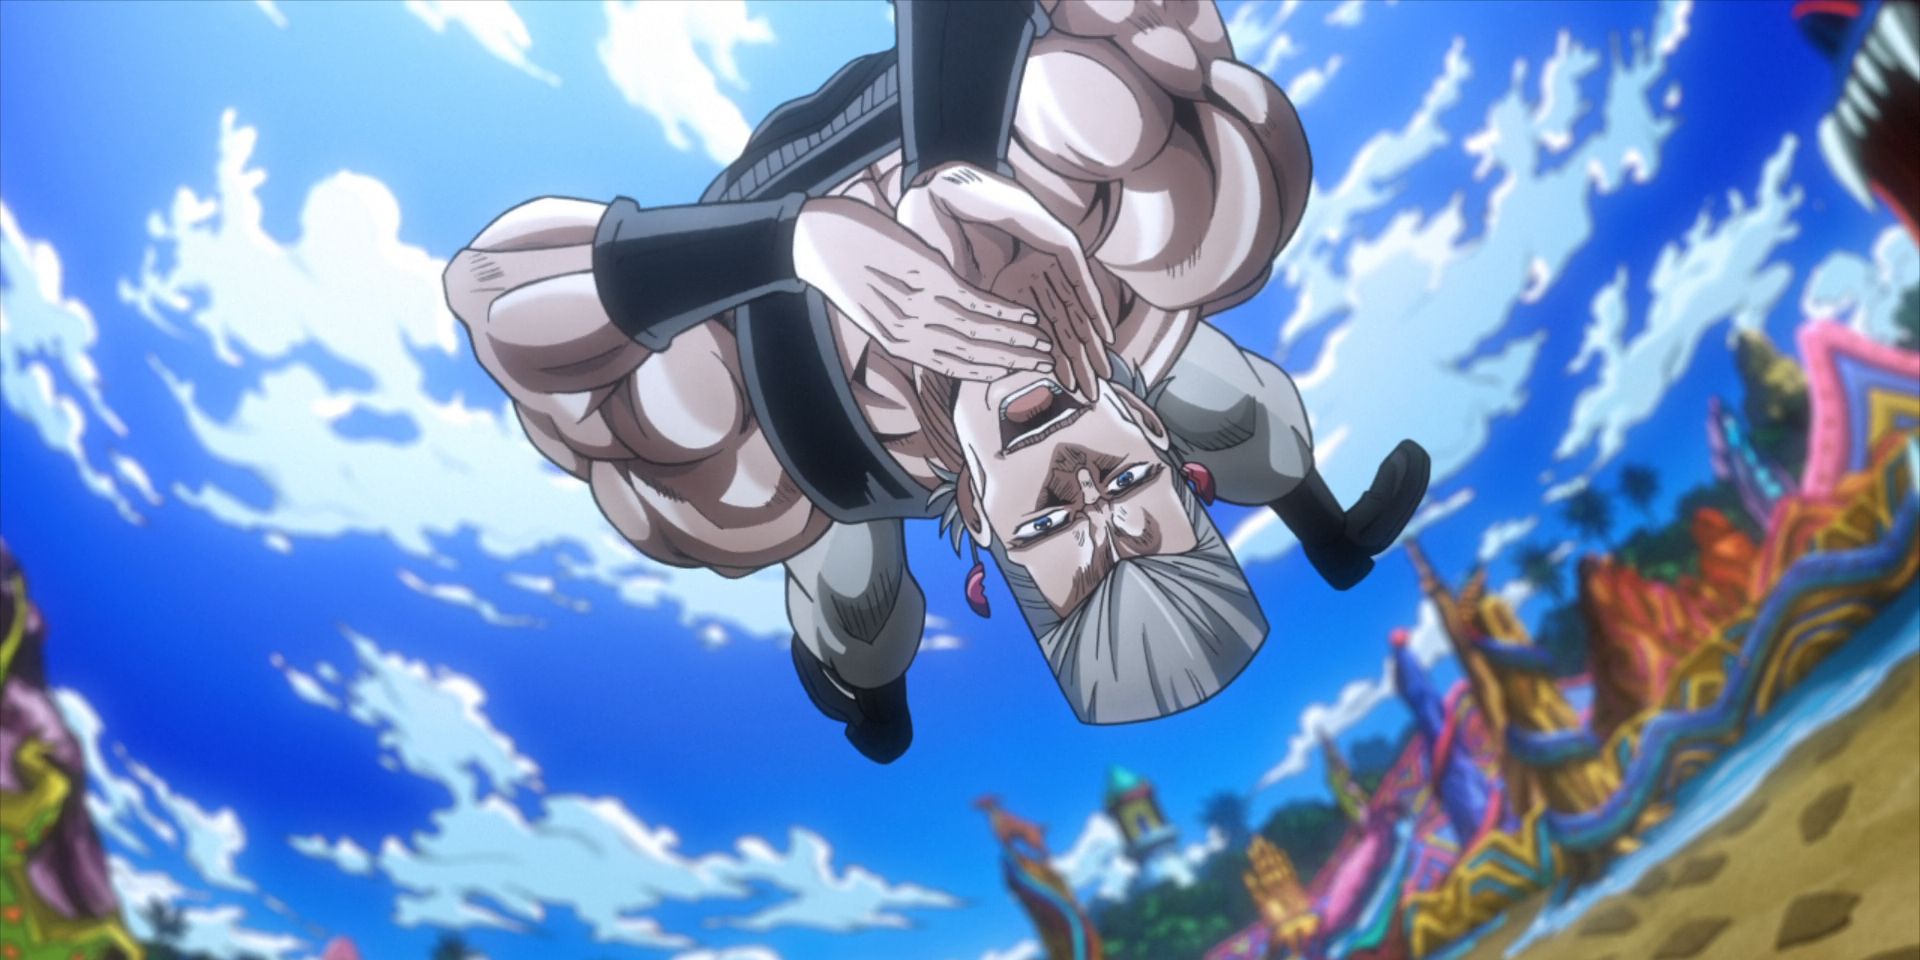 Polnareff from Stardust Crusaders is Gleeful